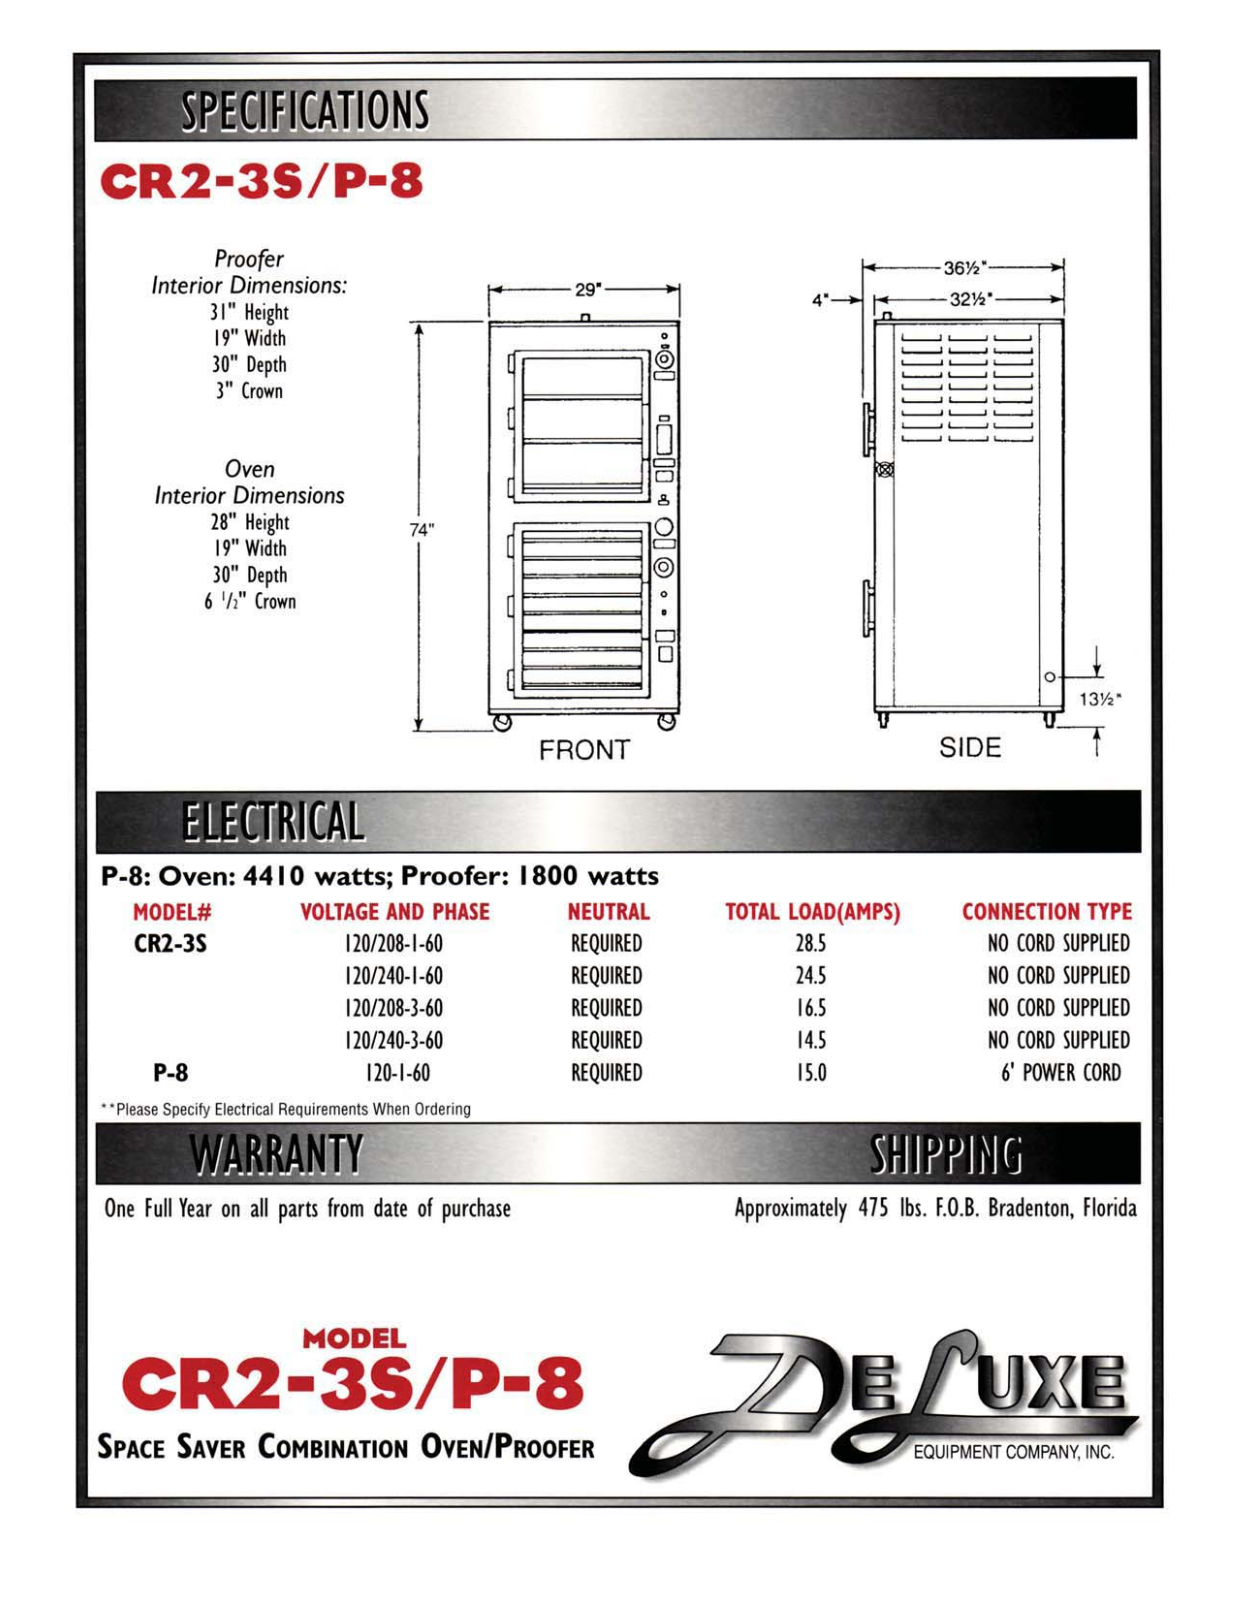 Deluxe CR2-3S User Manual